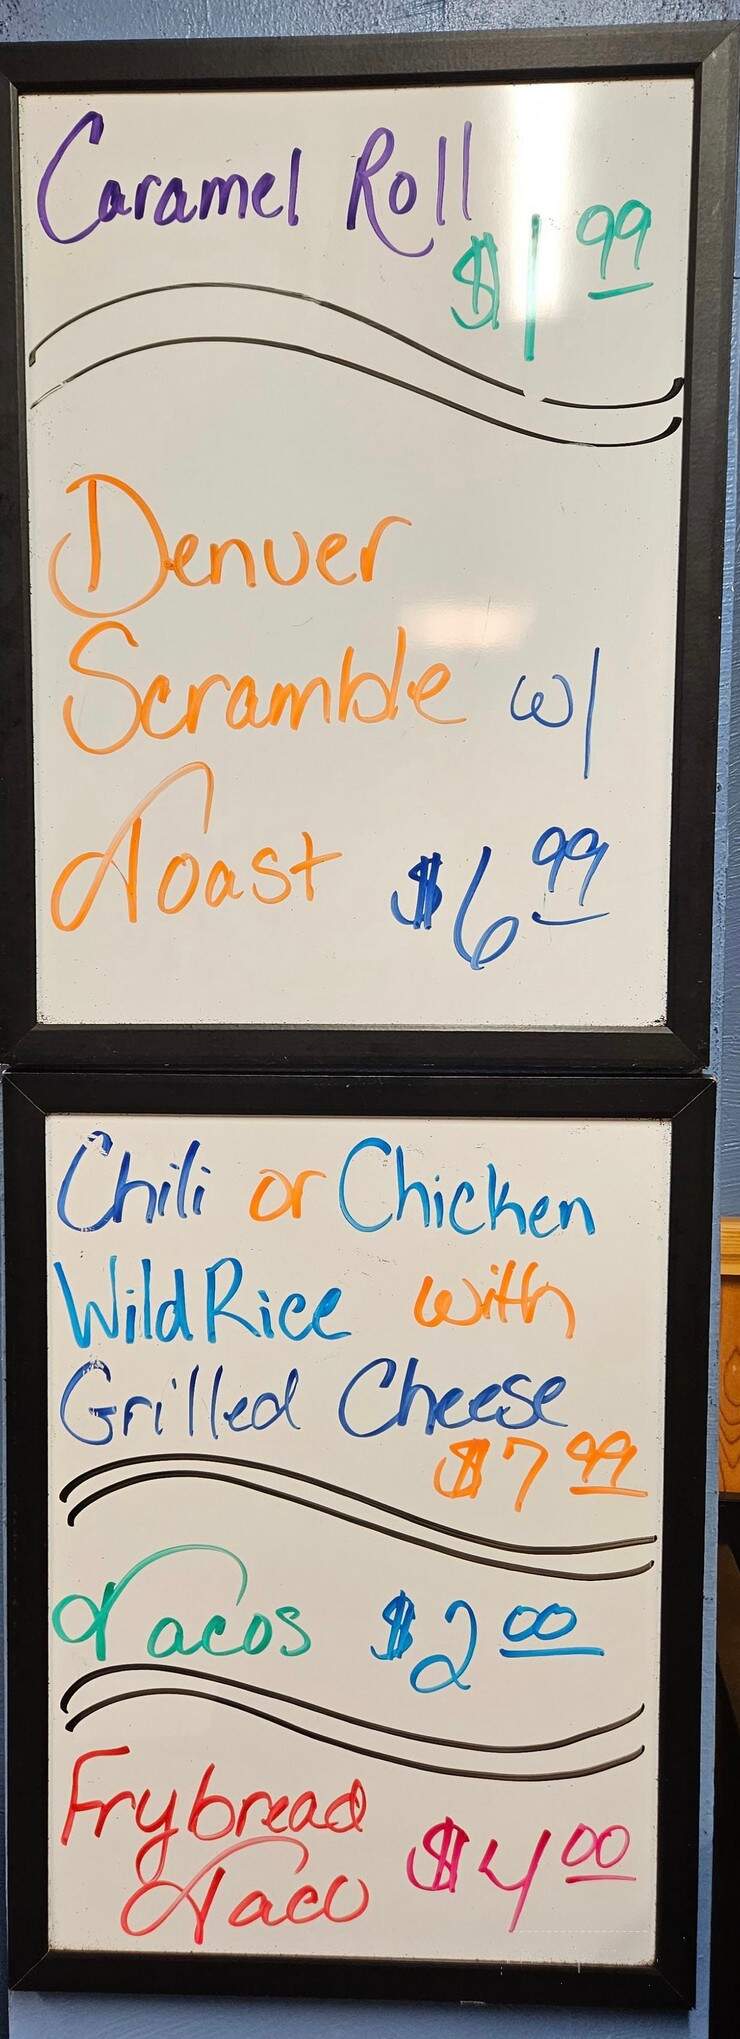 North Wind Grocery & Cafe - Nevis, MN